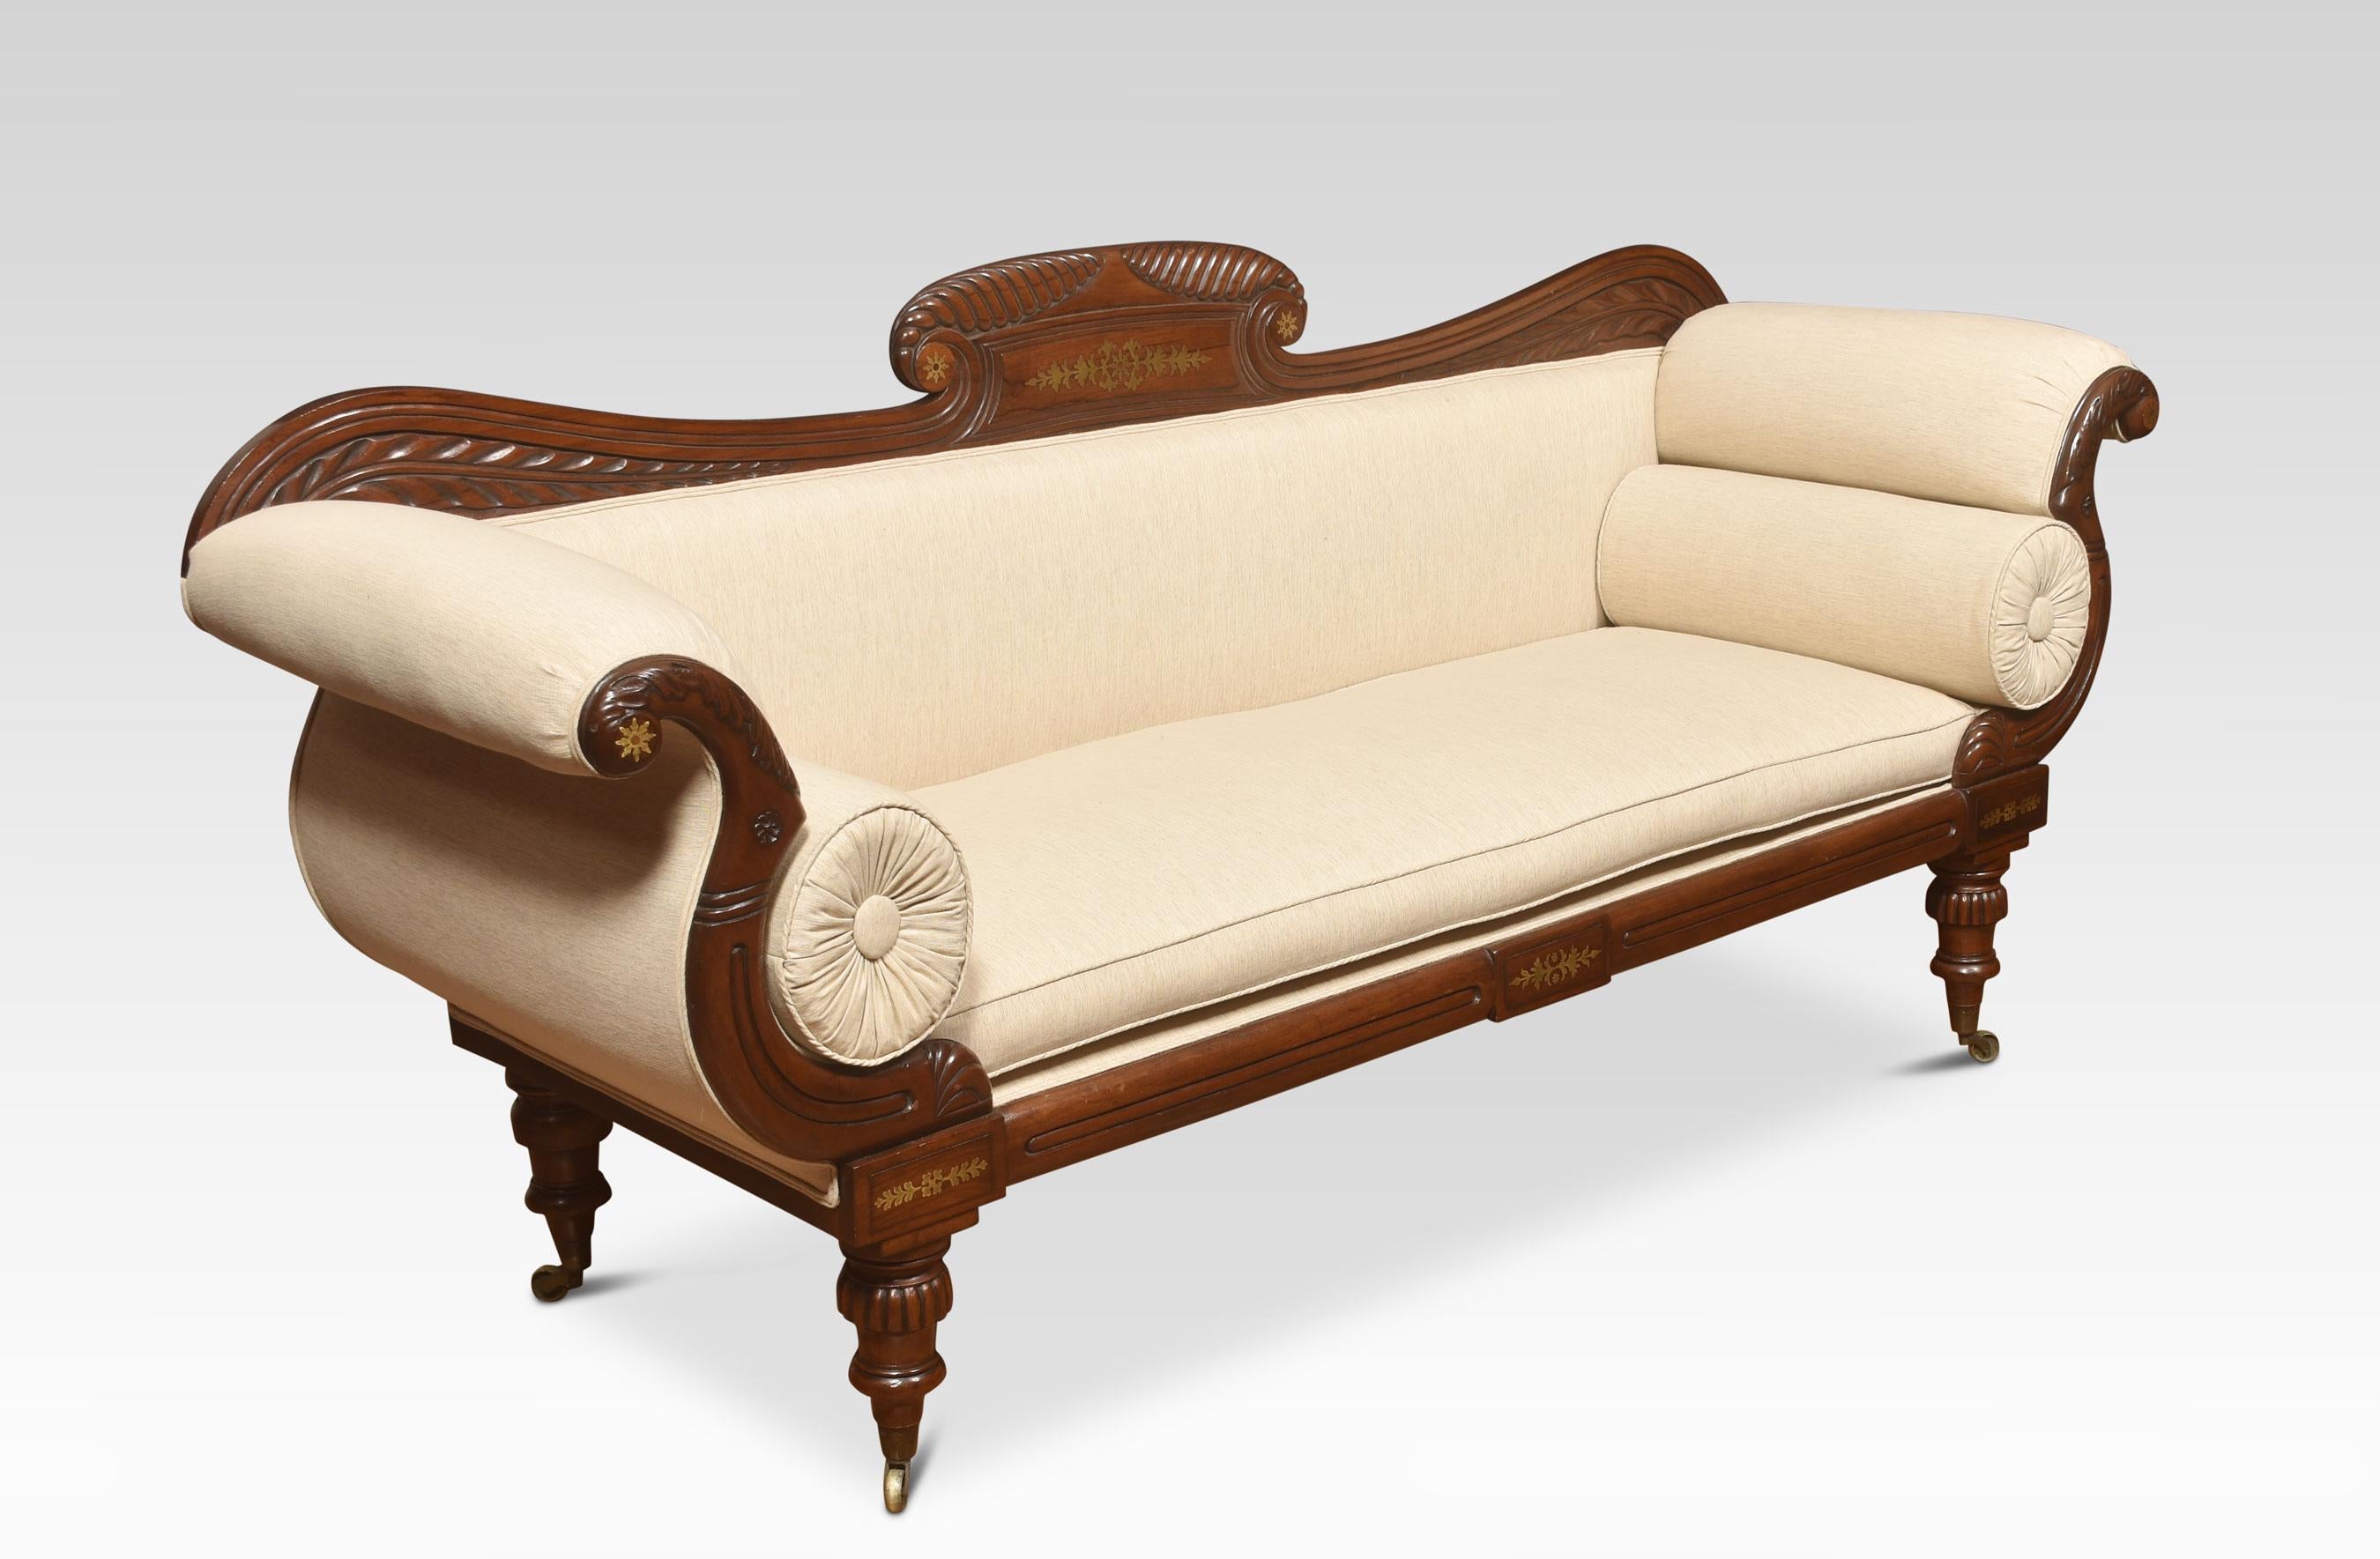 Early 19th-century mahogany framed scroll end settee, the acanthus scrolling arched top rail with brass detail above back and seat flanked by scrolling upholstered arms. Standing on foliated tapered legs with brass caps and